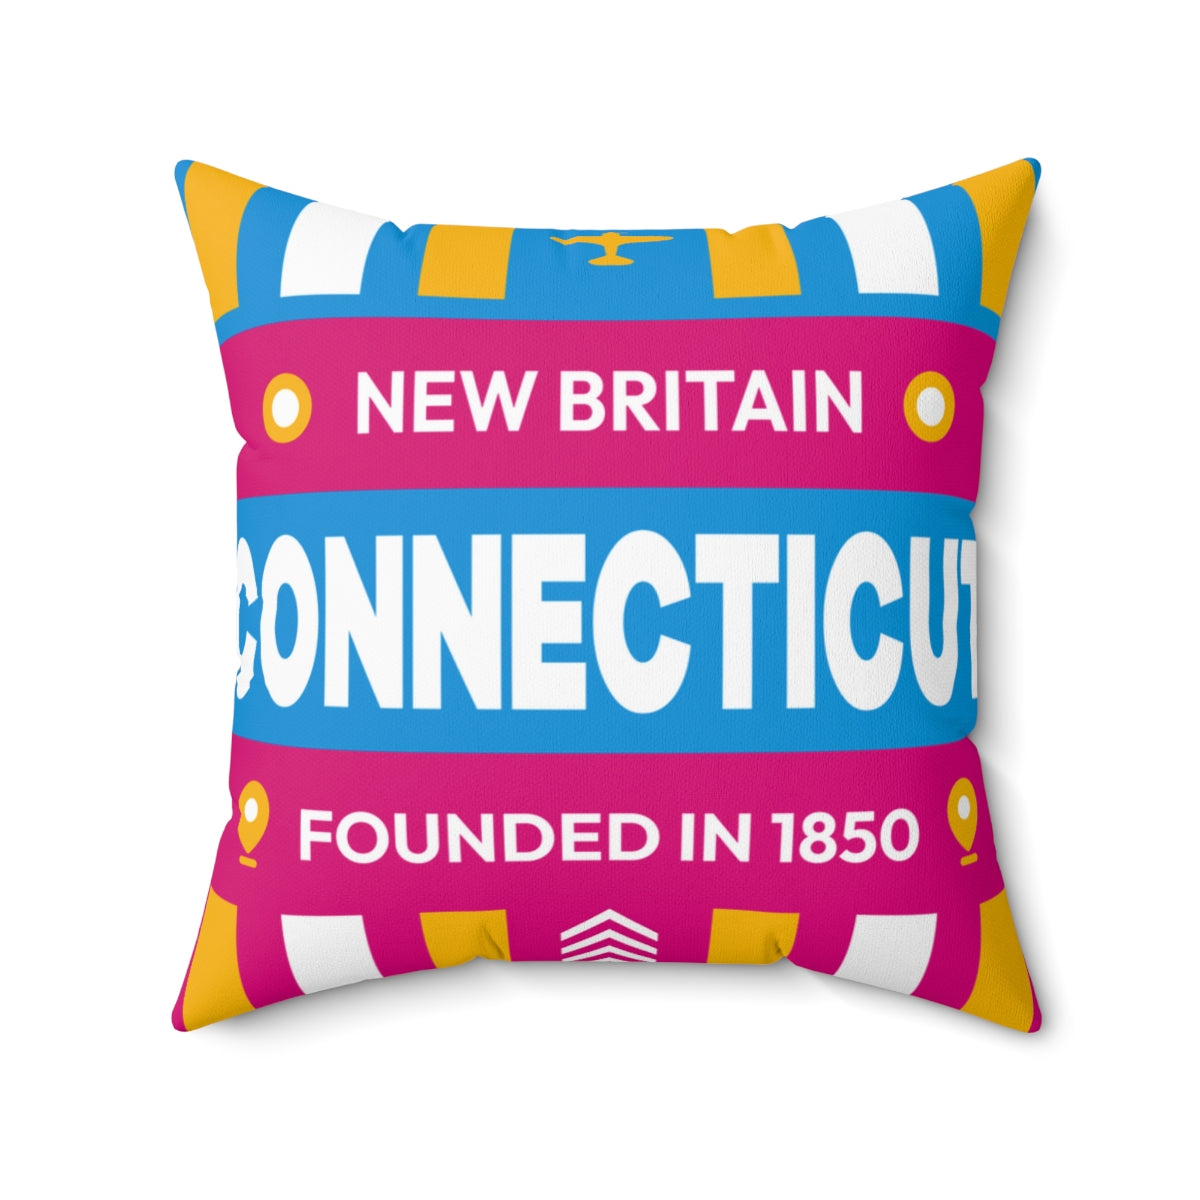 20"x20" pillow design for New Britain, Connecticut Top view.